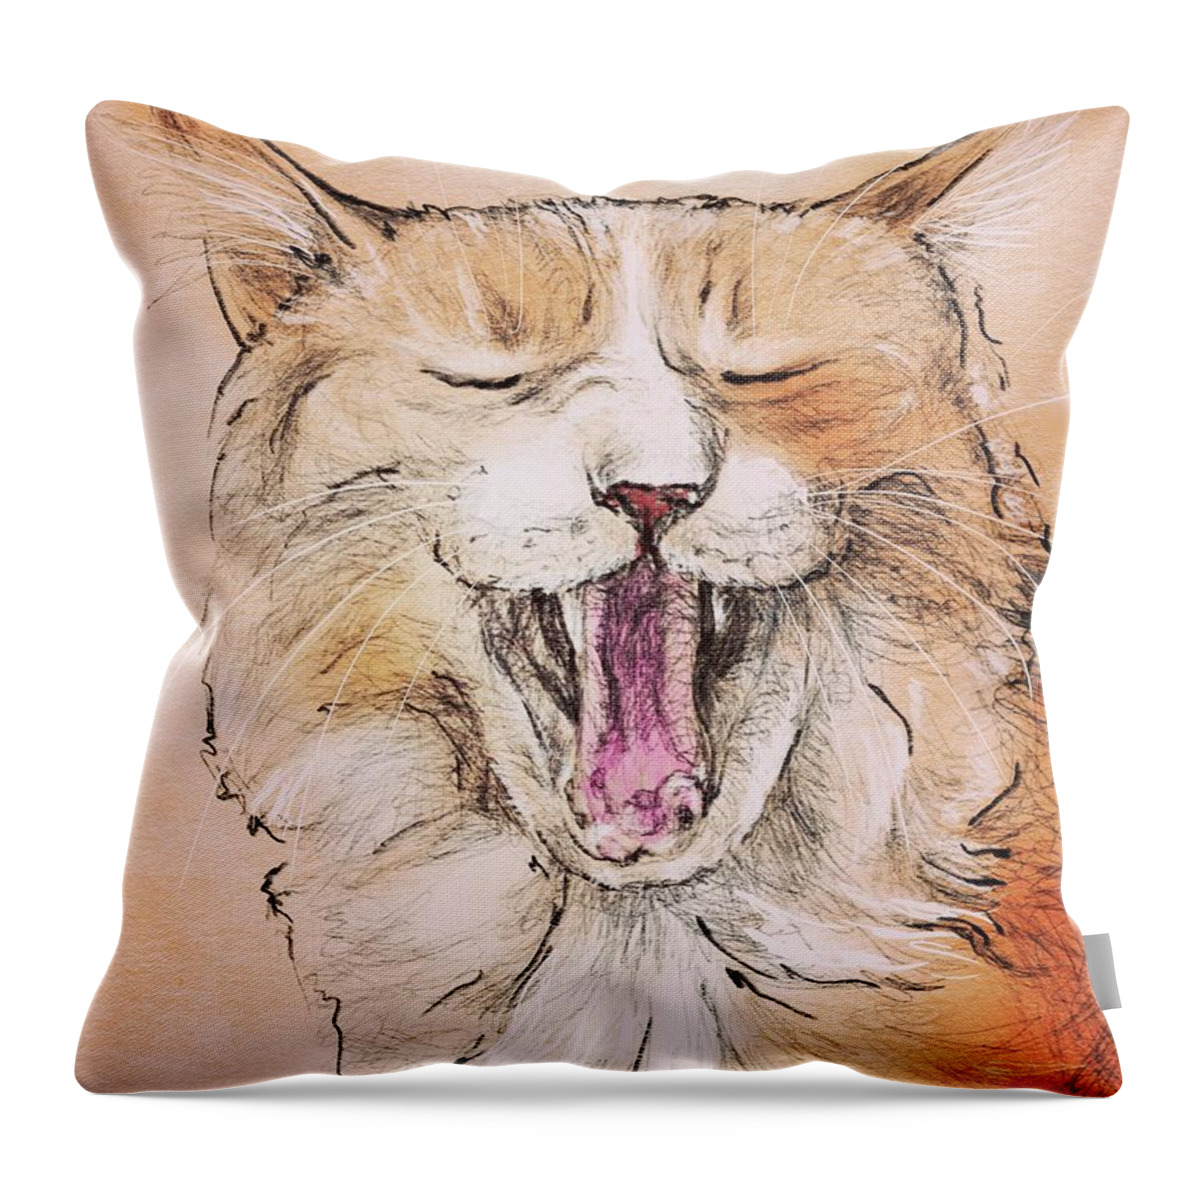 Cat Throw Pillow featuring the digital art Yawning Ginger Cat by AnneMarie Welsh